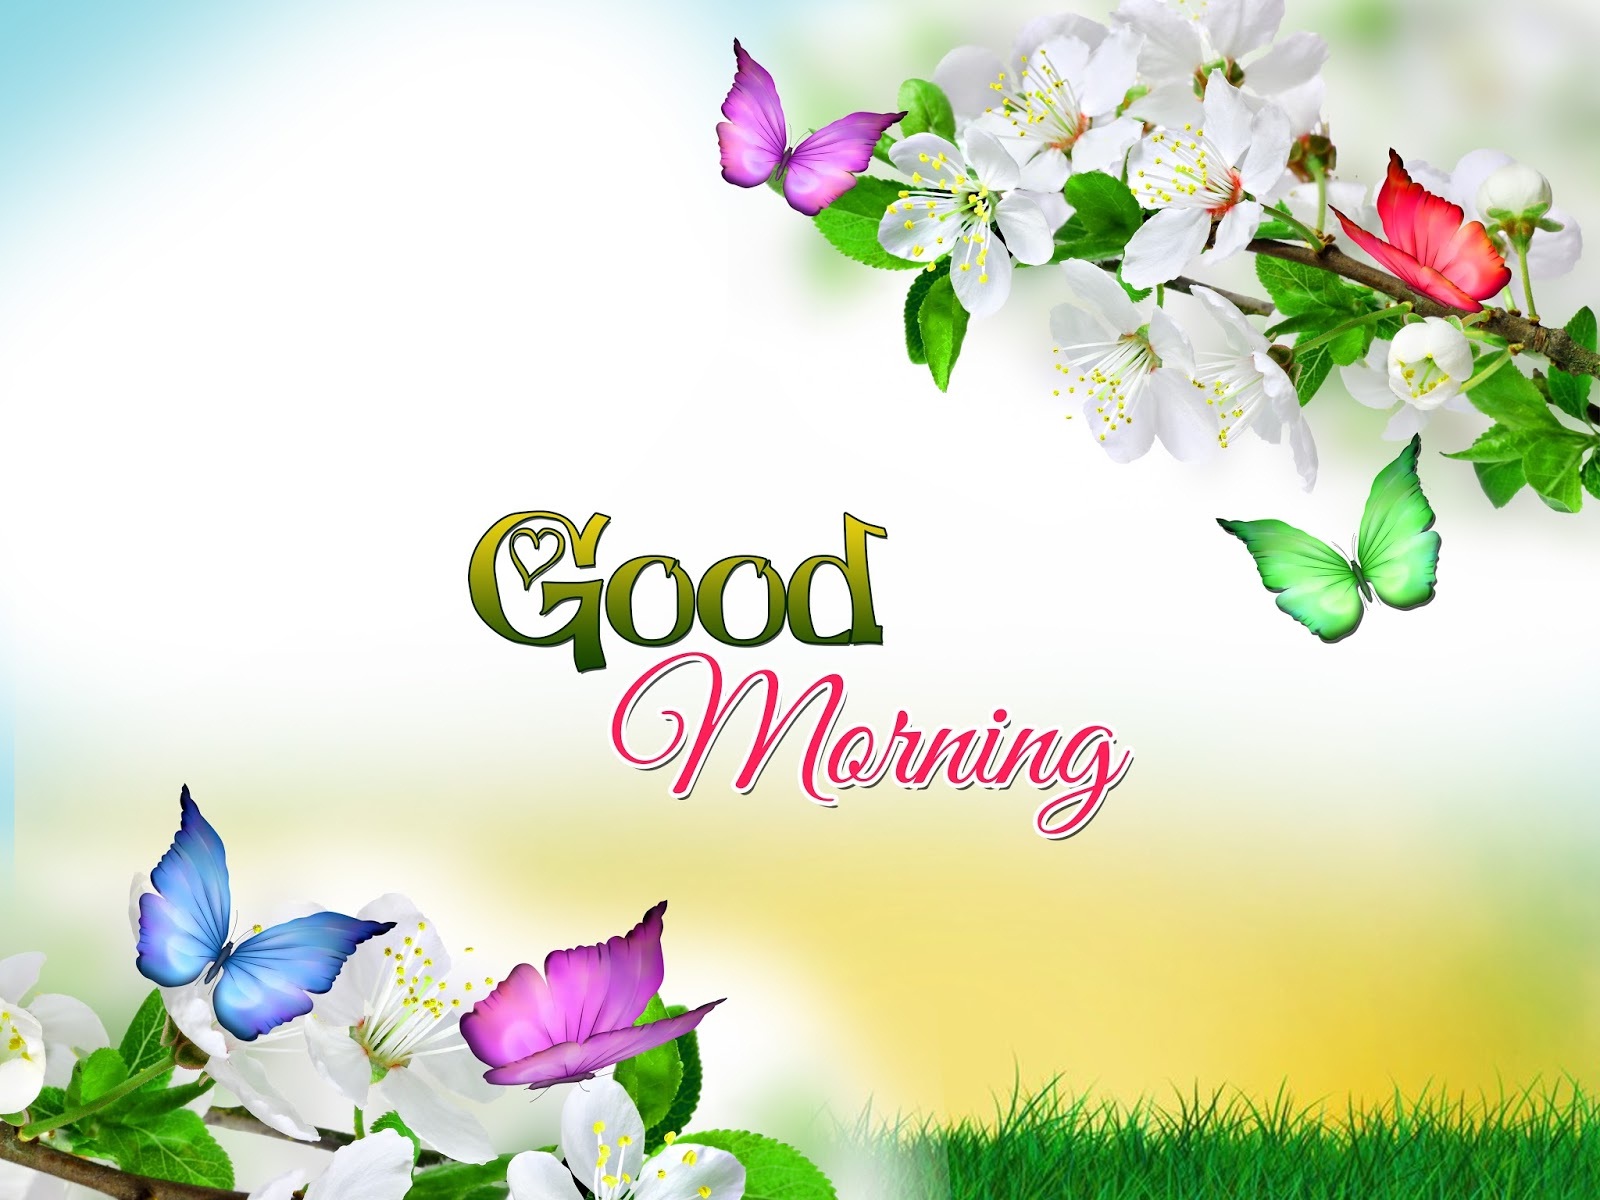 Good Morning Wishes To Friends And Family Wallpaper HD